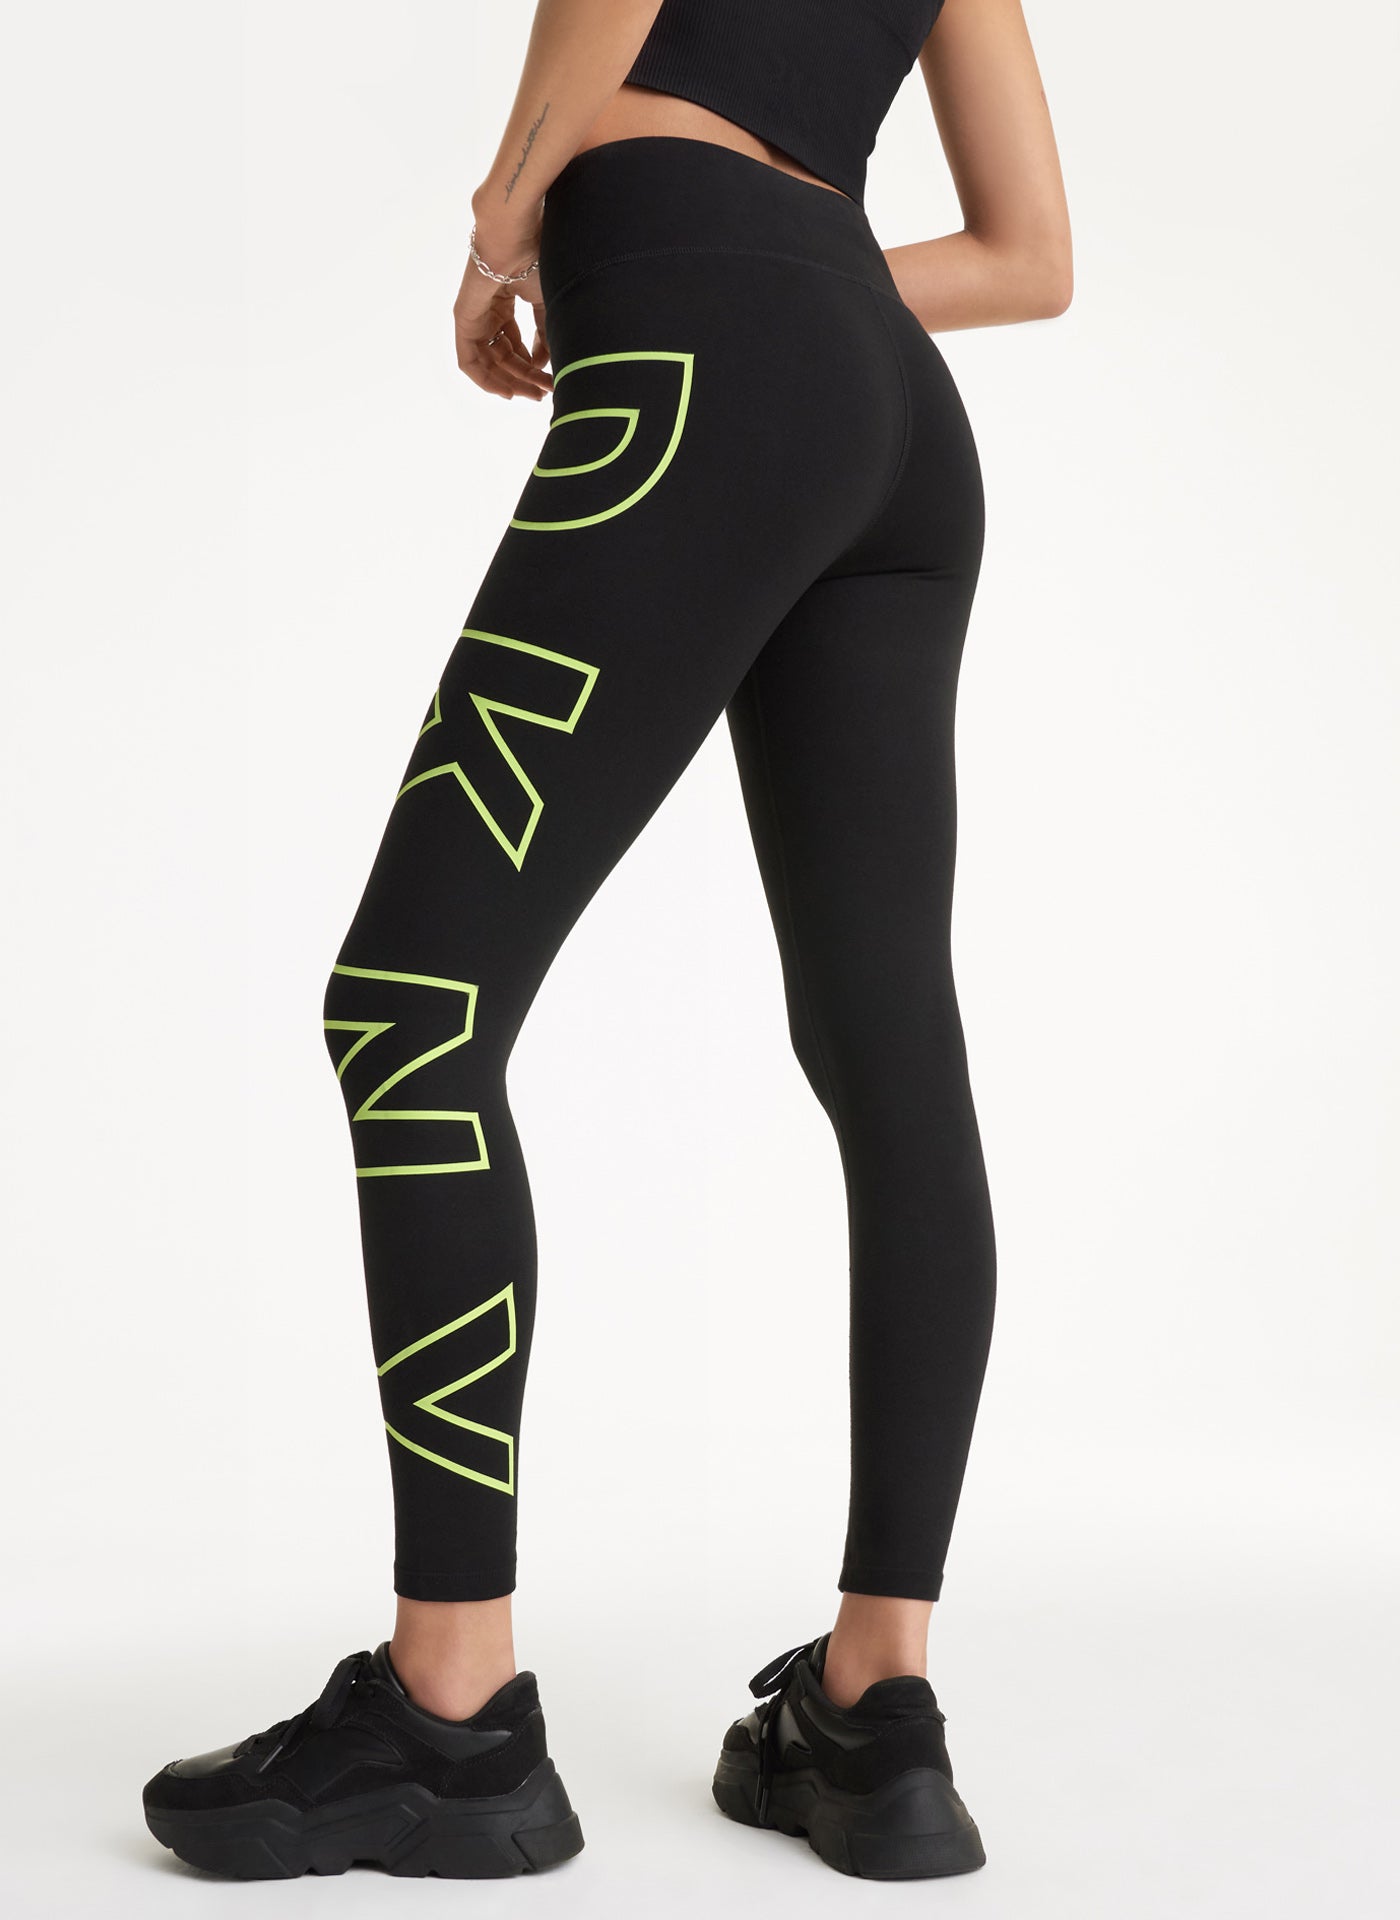 DKNY Sport Sueded Compression High Waisted Ankle Length Leggings | Dillard's